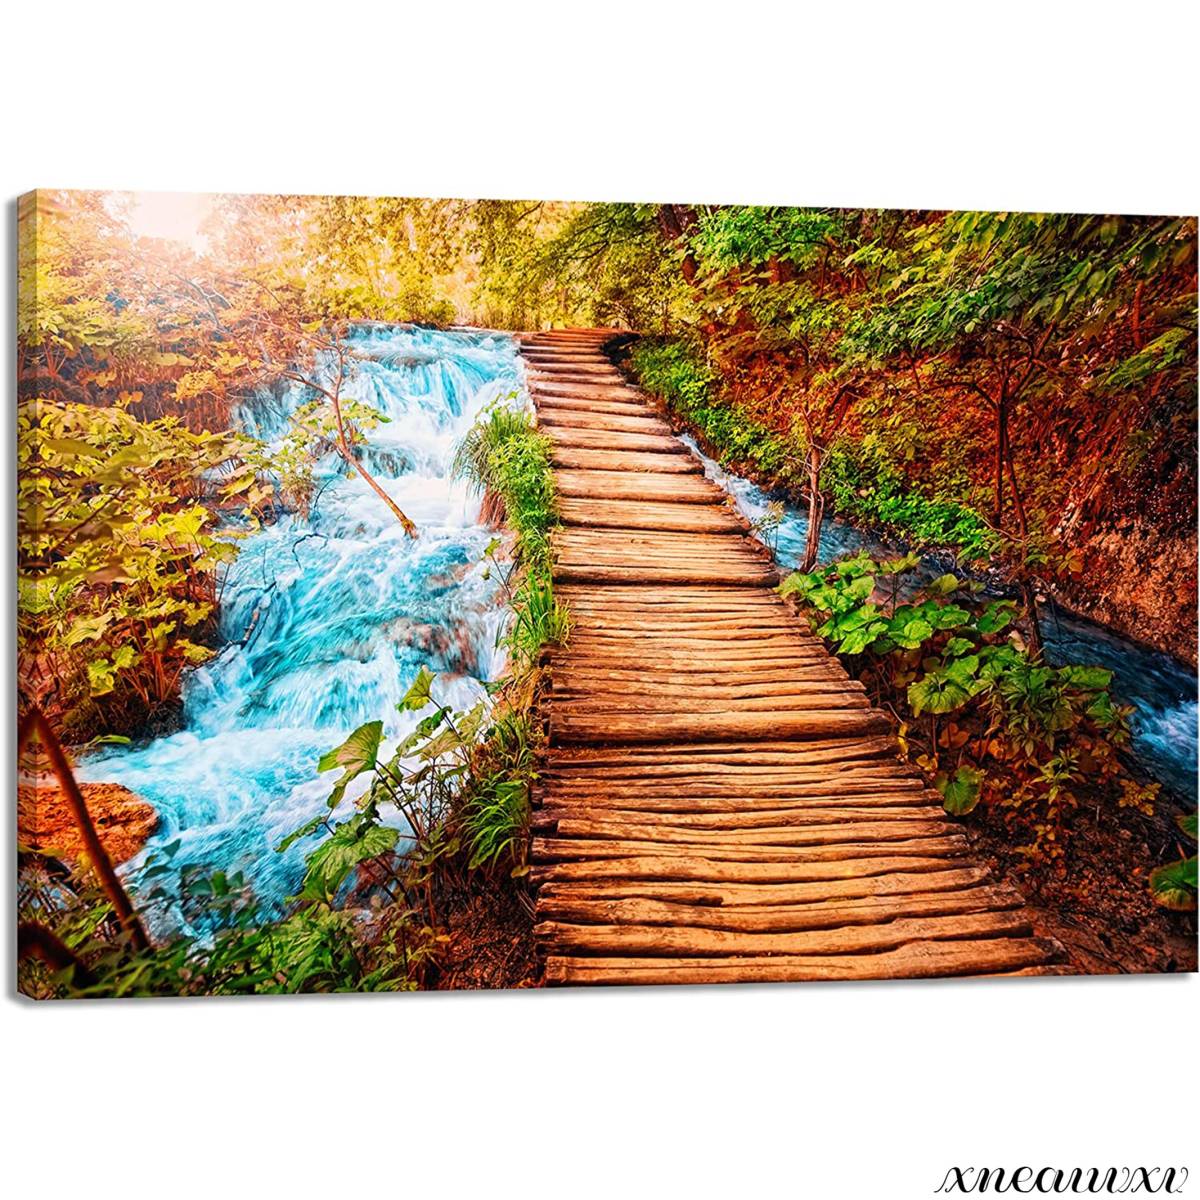 Natural scenery art panel nature mountain stream spectacular view interior wall hanging room decoration decoration redecoration interior living room canvas art painting fashion appreciation, artwork, painting, graphic